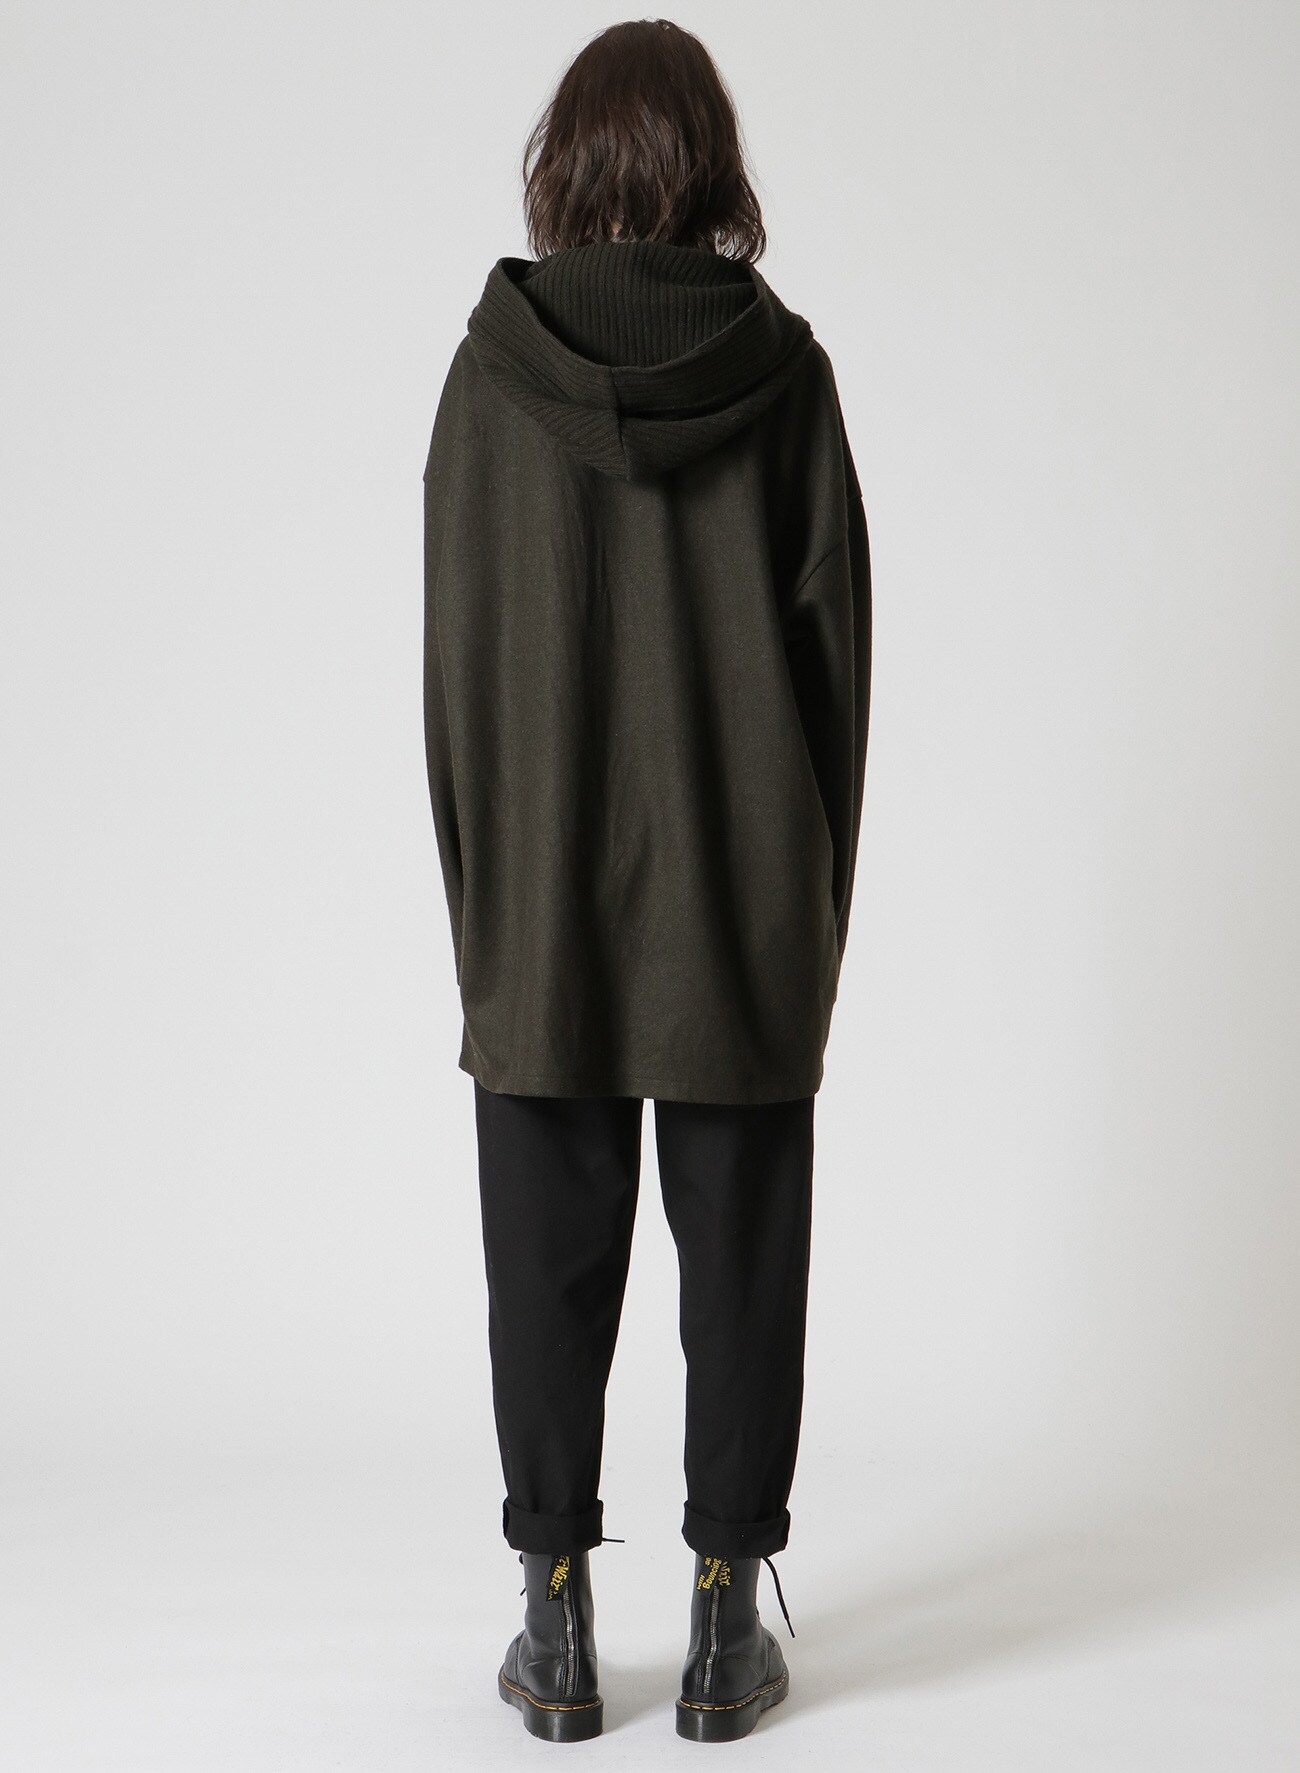 MIDDLE PLAIN STITCH BUTTON HOODED LONG T